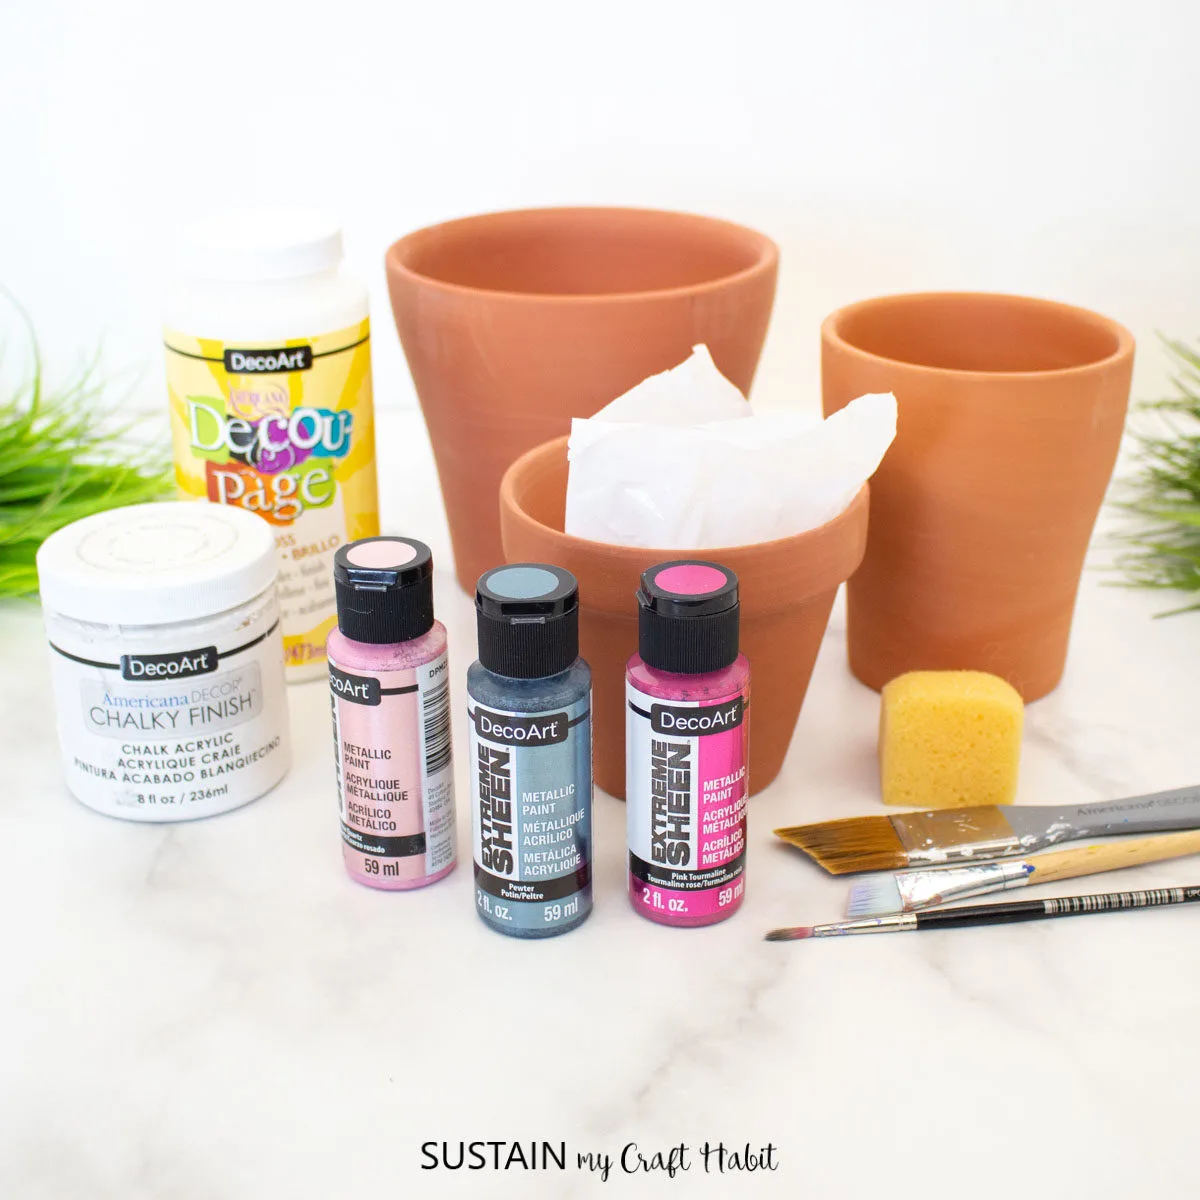 Materials needed to make painted marble effect terracotta pots including clay pots, paint, and paintbrushes.